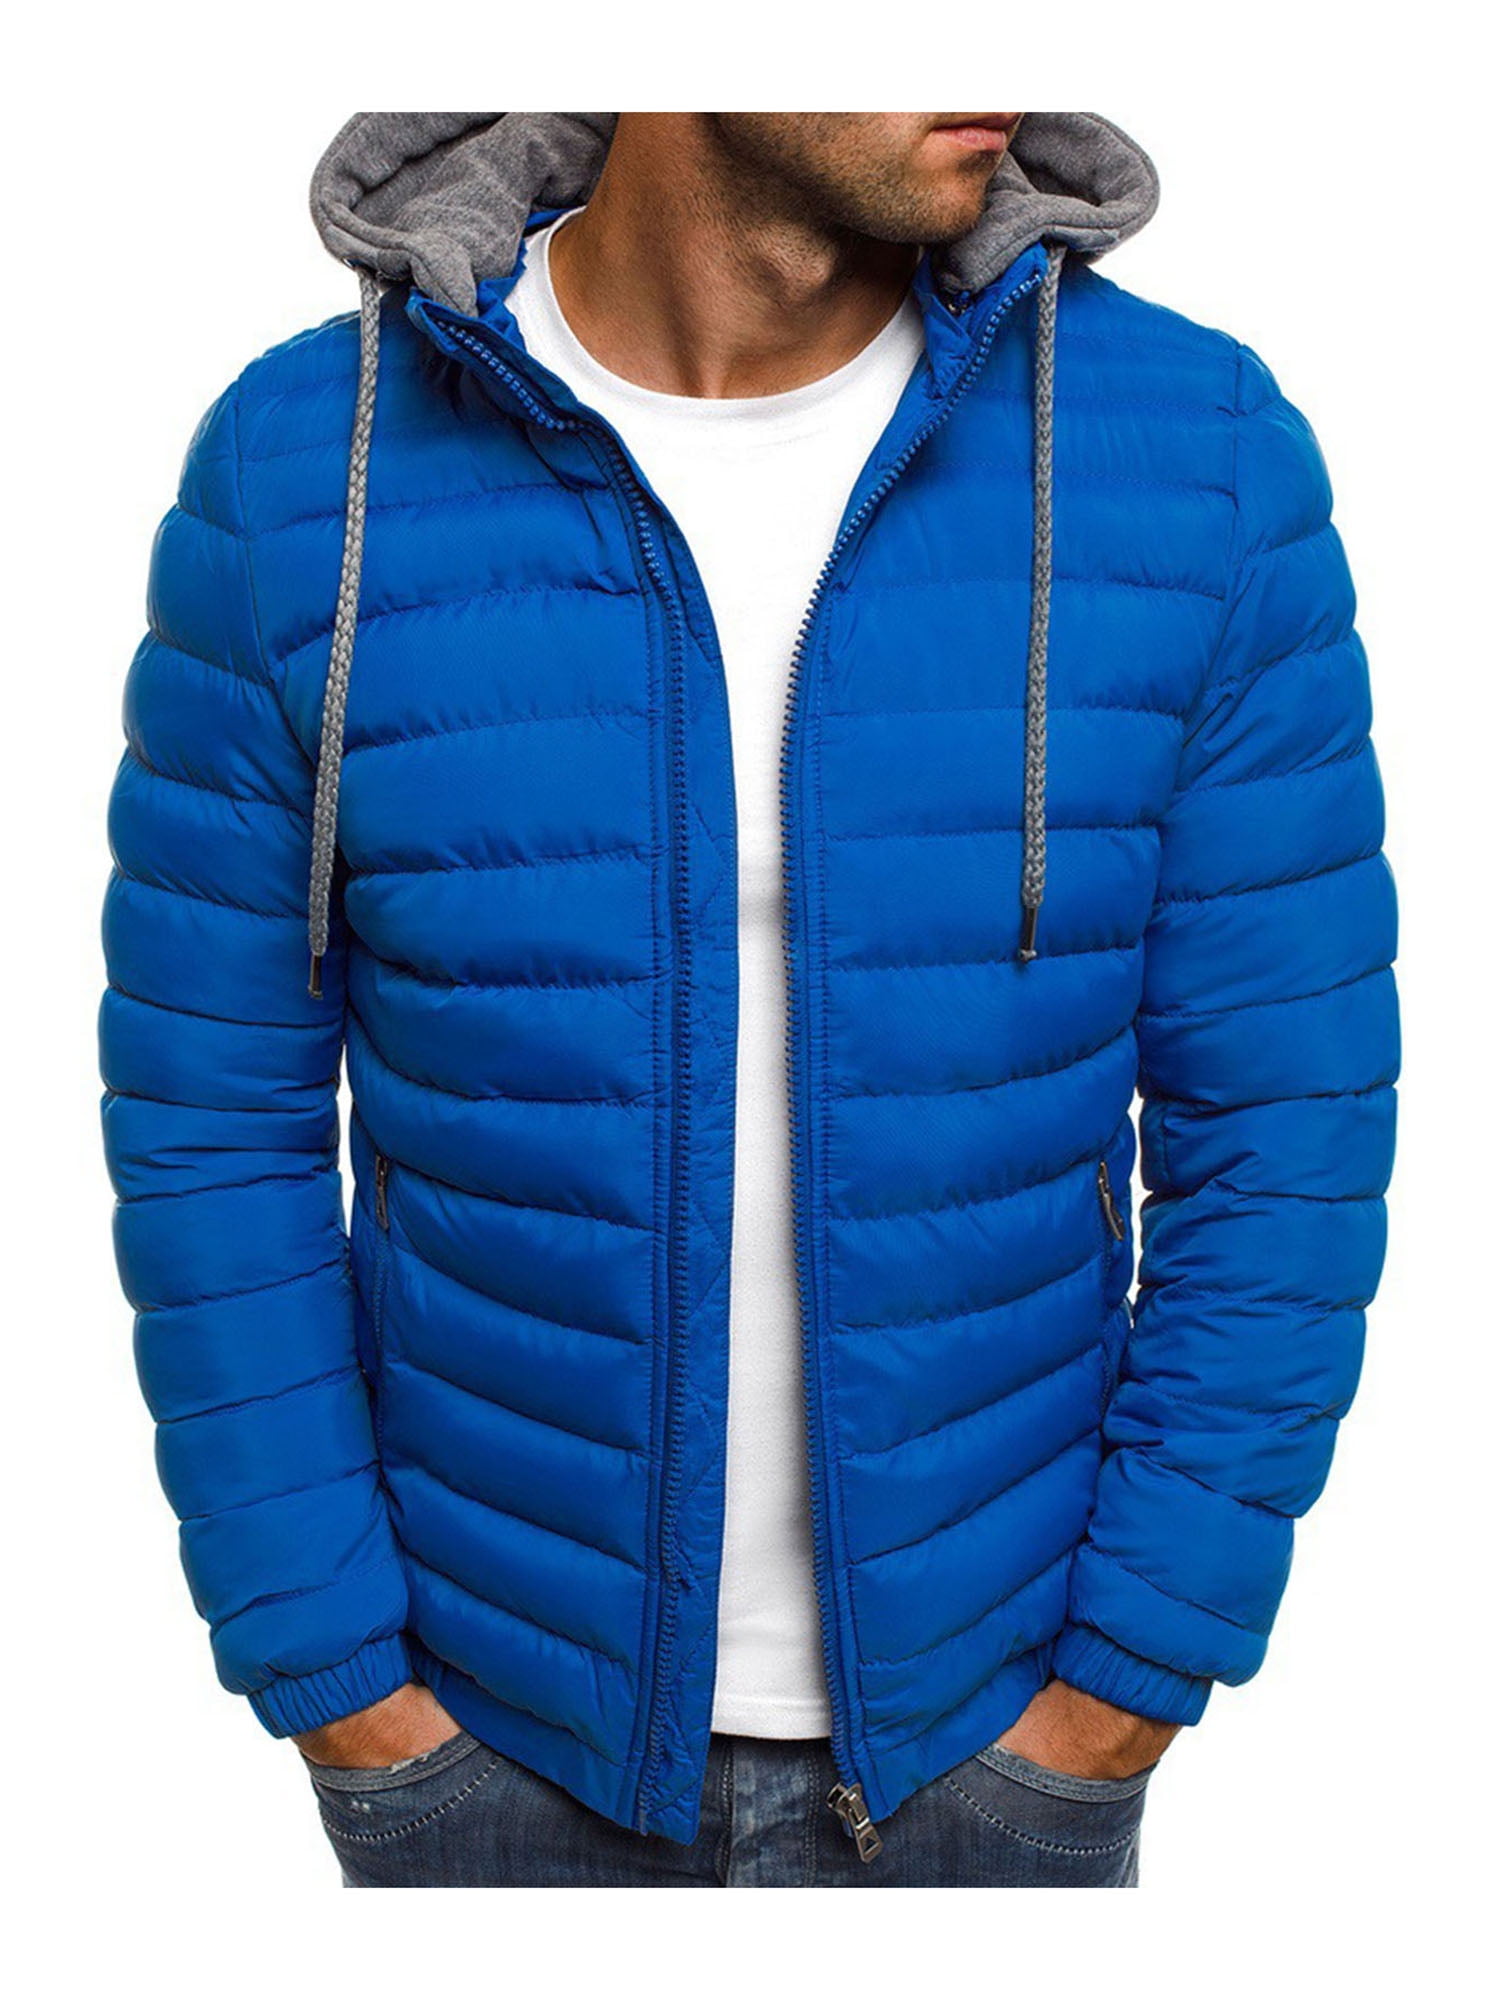 Men's Lightweight Down Puffer Solid Color Jacket Breathable Warm Causal ...